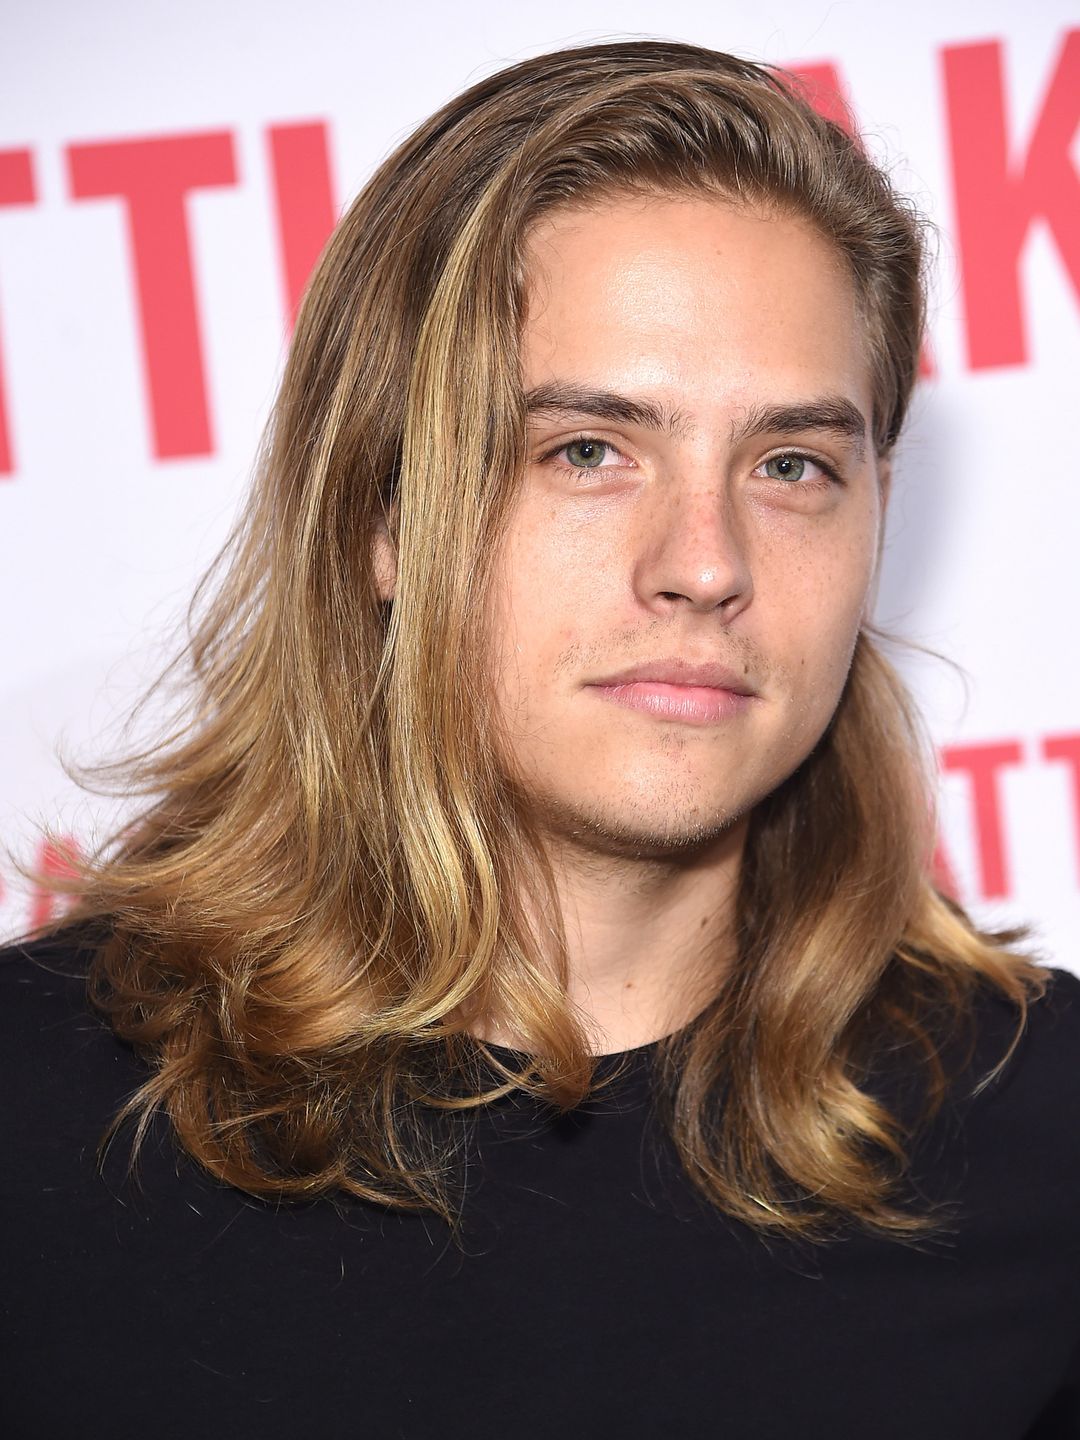 Dylan Sprouse how did he became famous